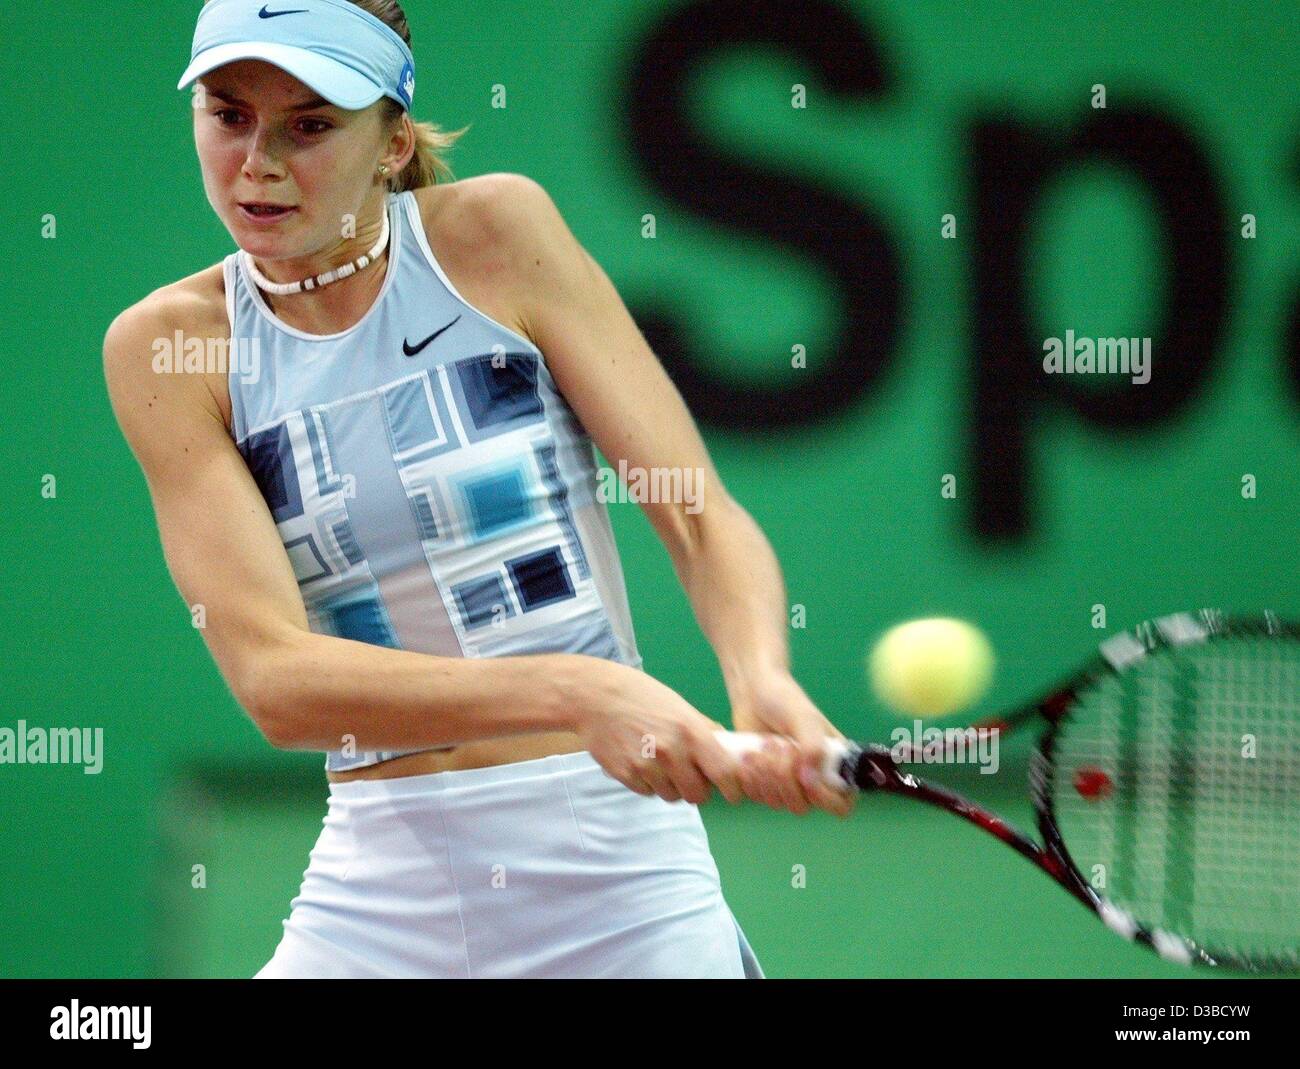 (dpa) - Slovakia's Daniela Hantuchova plays a backhand during the quarter final match of the 13th International Sparkassen Cup WTA Tournament in Leipzig, Germany, 27 September 2002. She is defeated 6:4 and 7:5 by Belgium's Justine Henin. Stock Photo